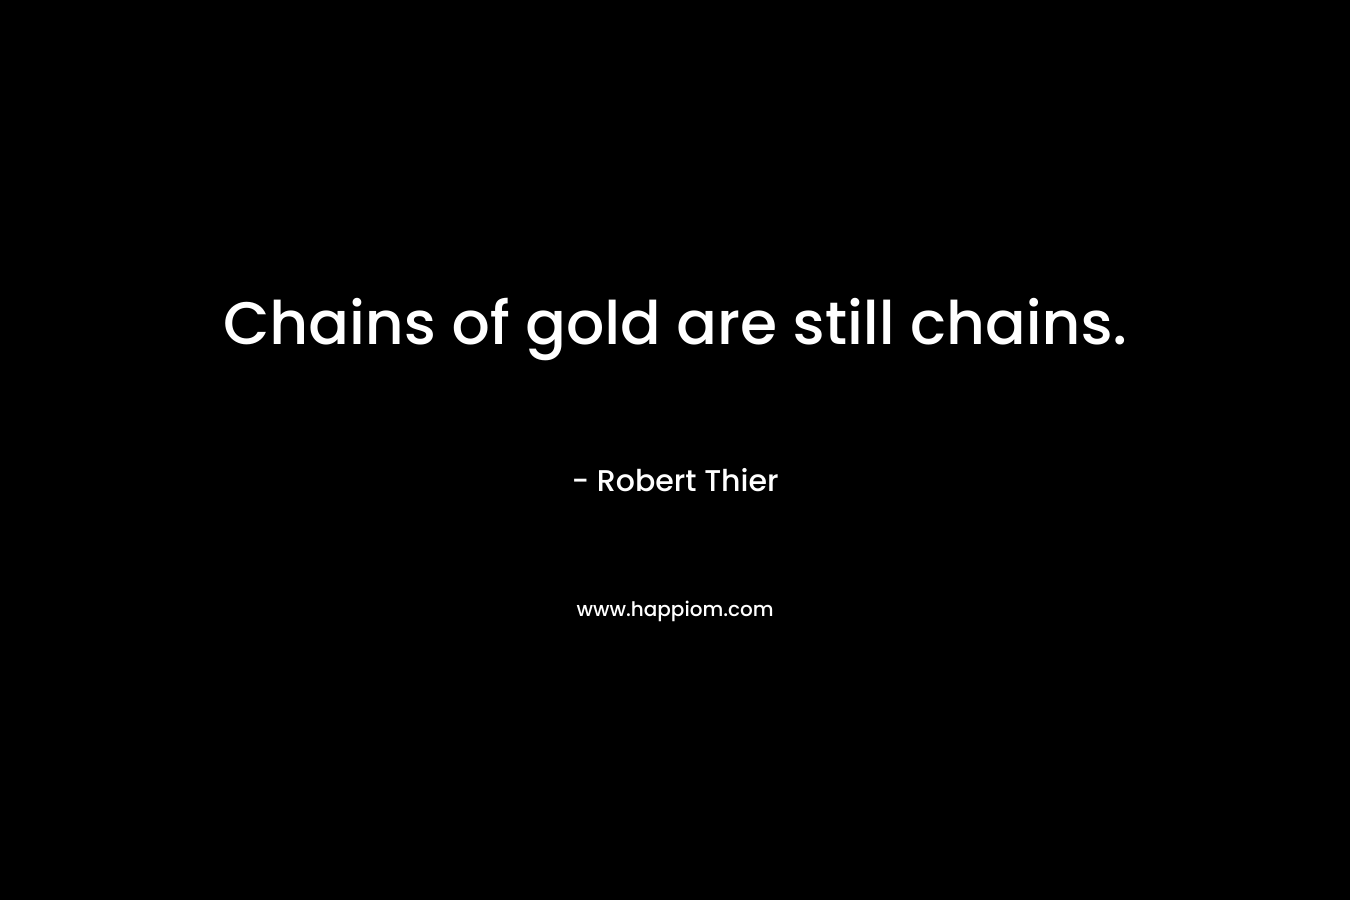 Chains of gold are still chains.